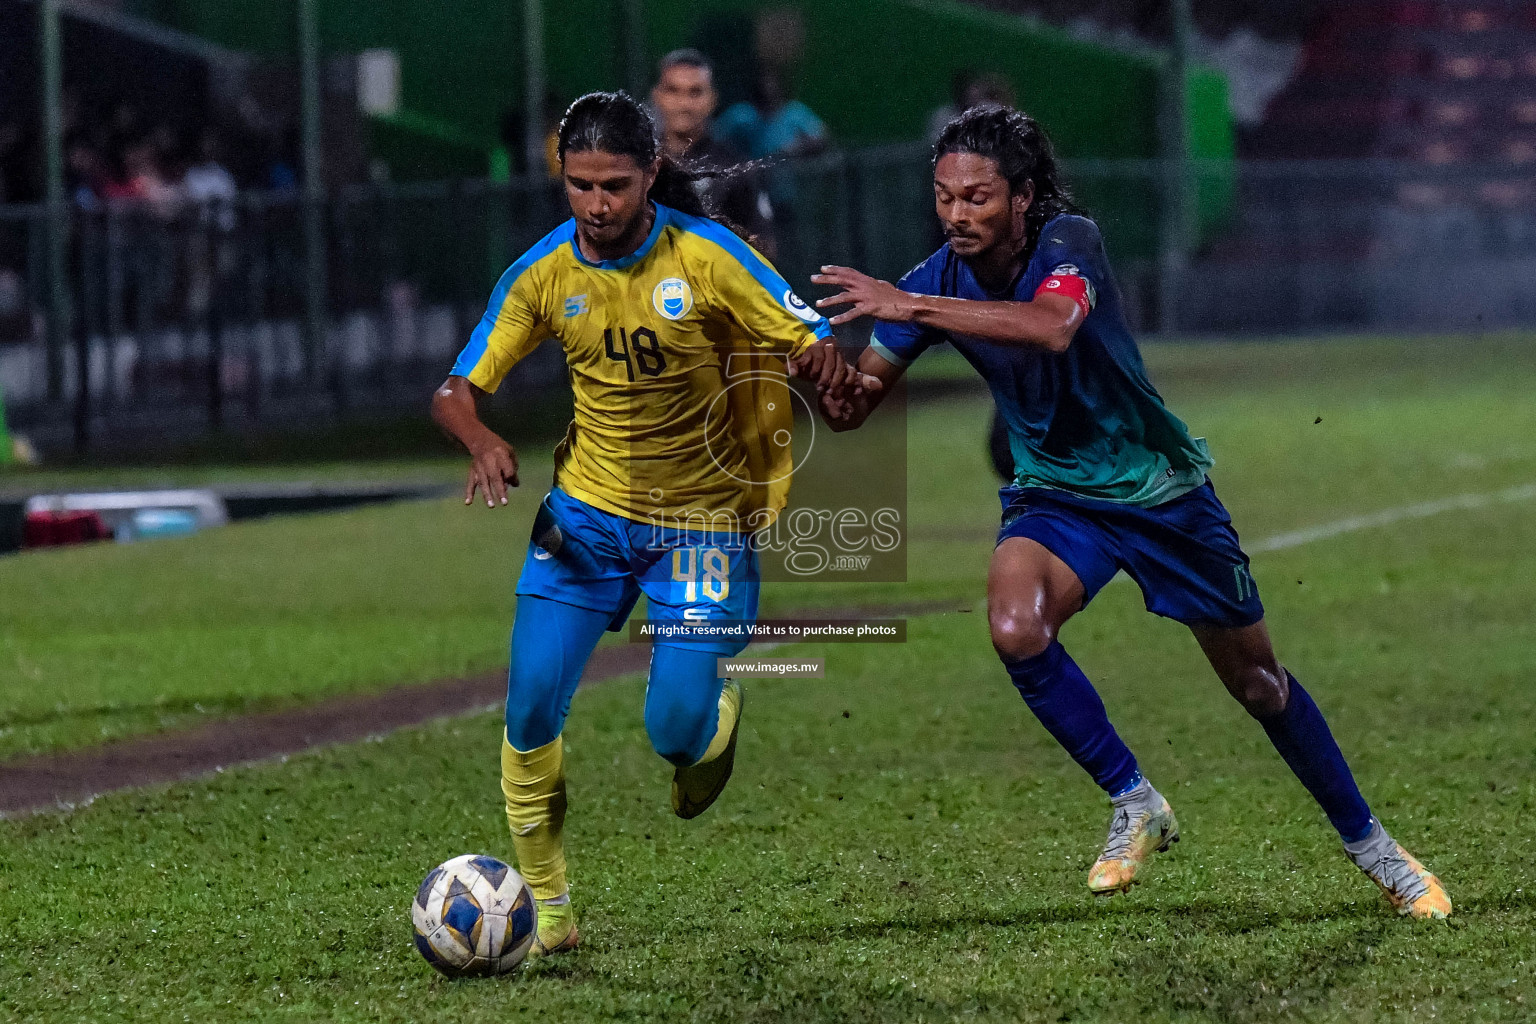 Club Valencia vs Super United sports in the FA Cup 2022 on 18th Aug 2022, held in National Football Stadium, Male', Maldives Photos: Nausham Waheed / Images.mv